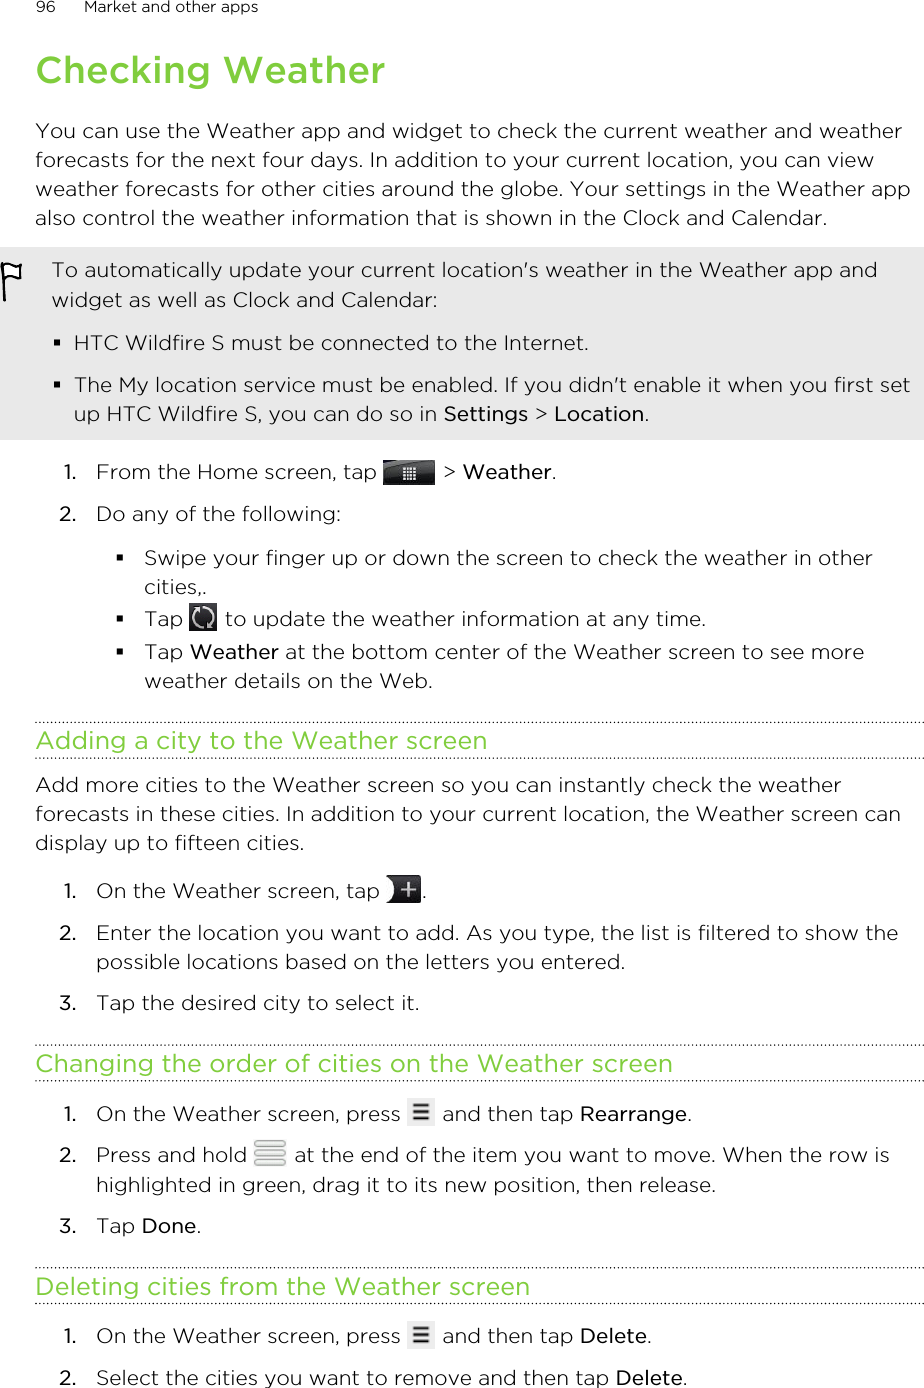 Checking WeatherYou can use the Weather app and widget to check the current weather and weatherforecasts for the next four days. In addition to your current location, you can viewweather forecasts for other cities around the globe. Your settings in the Weather appalso control the weather information that is shown in the Clock and Calendar.To automatically update your current location&apos;s weather in the Weather app andwidget as well as Clock and Calendar:§HTC Wildfire S must be connected to the Internet.§The My location service must be enabled. If you didn&apos;t enable it when you first setup HTC Wildfire S, you can do so in Settings &gt; Location.1. From the Home screen, tap   &gt; Weather.2. Do any of the following:§Swipe your finger up or down the screen to check the weather in othercities,.§Tap   to update the weather information at any time.§Tap Weather at the bottom center of the Weather screen to see moreweather details on the Web.Adding a city to the Weather screenAdd more cities to the Weather screen so you can instantly check the weatherforecasts in these cities. In addition to your current location, the Weather screen candisplay up to fifteen cities.1. On the Weather screen, tap  .2. Enter the location you want to add. As you type, the list is filtered to show thepossible locations based on the letters you entered.3. Tap the desired city to select it.Changing the order of cities on the Weather screen1. On the Weather screen, press   and then tap Rearrange.2. Press and hold   at the end of the item you want to move. When the row ishighlighted in green, drag it to its new position, then release.3. Tap Done.Deleting cities from the Weather screen1. On the Weather screen, press   and then tap Delete.2. Select the cities you want to remove and then tap Delete.96 Market and other apps